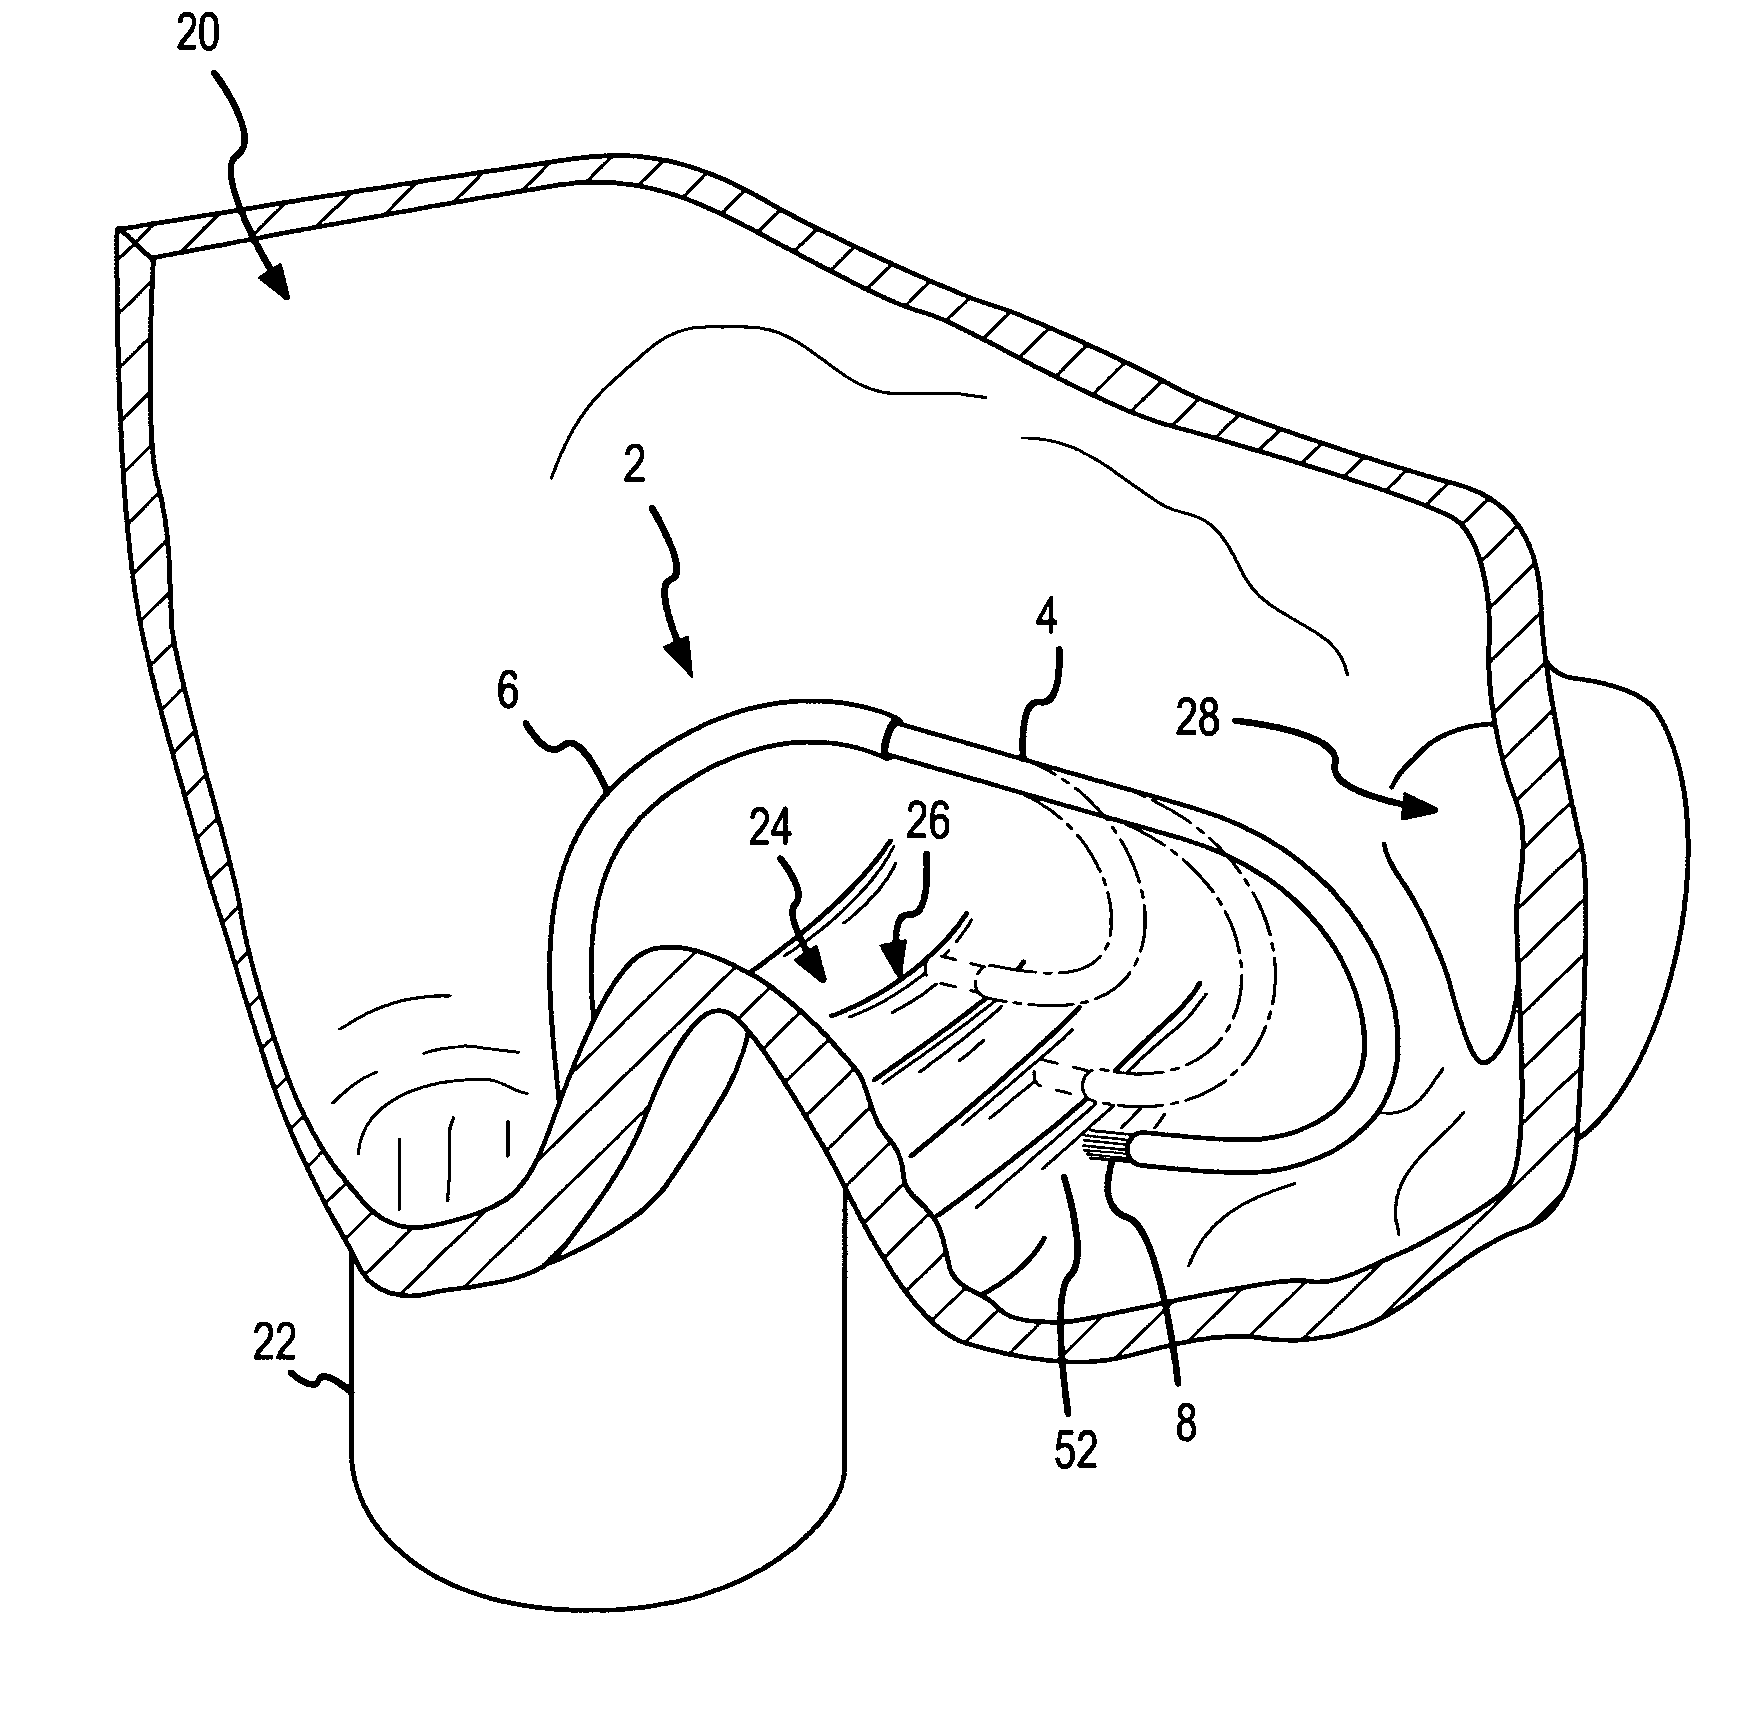 Curved ablation catheter